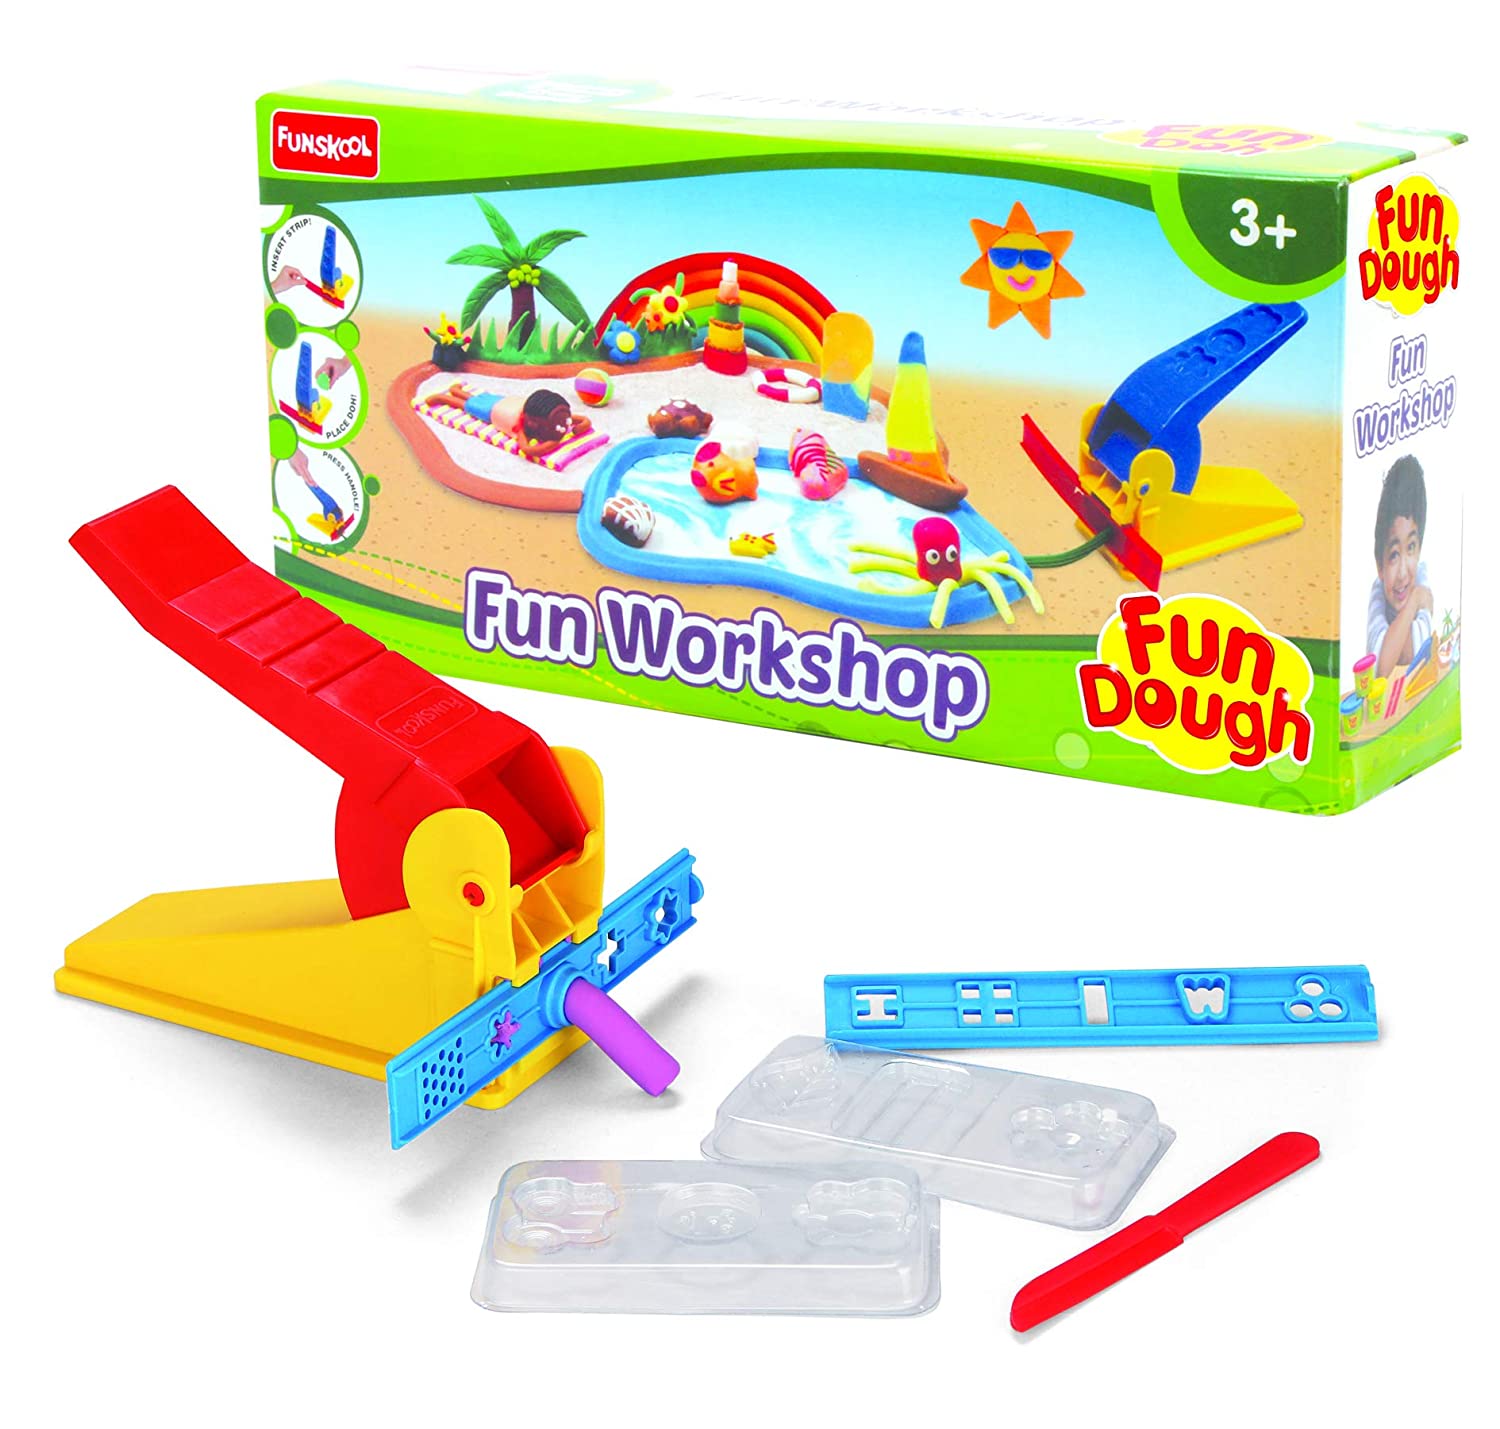 Fundough - Fun Workshop , Cutting and Moulding Playset, 3years + , Multi-Colour